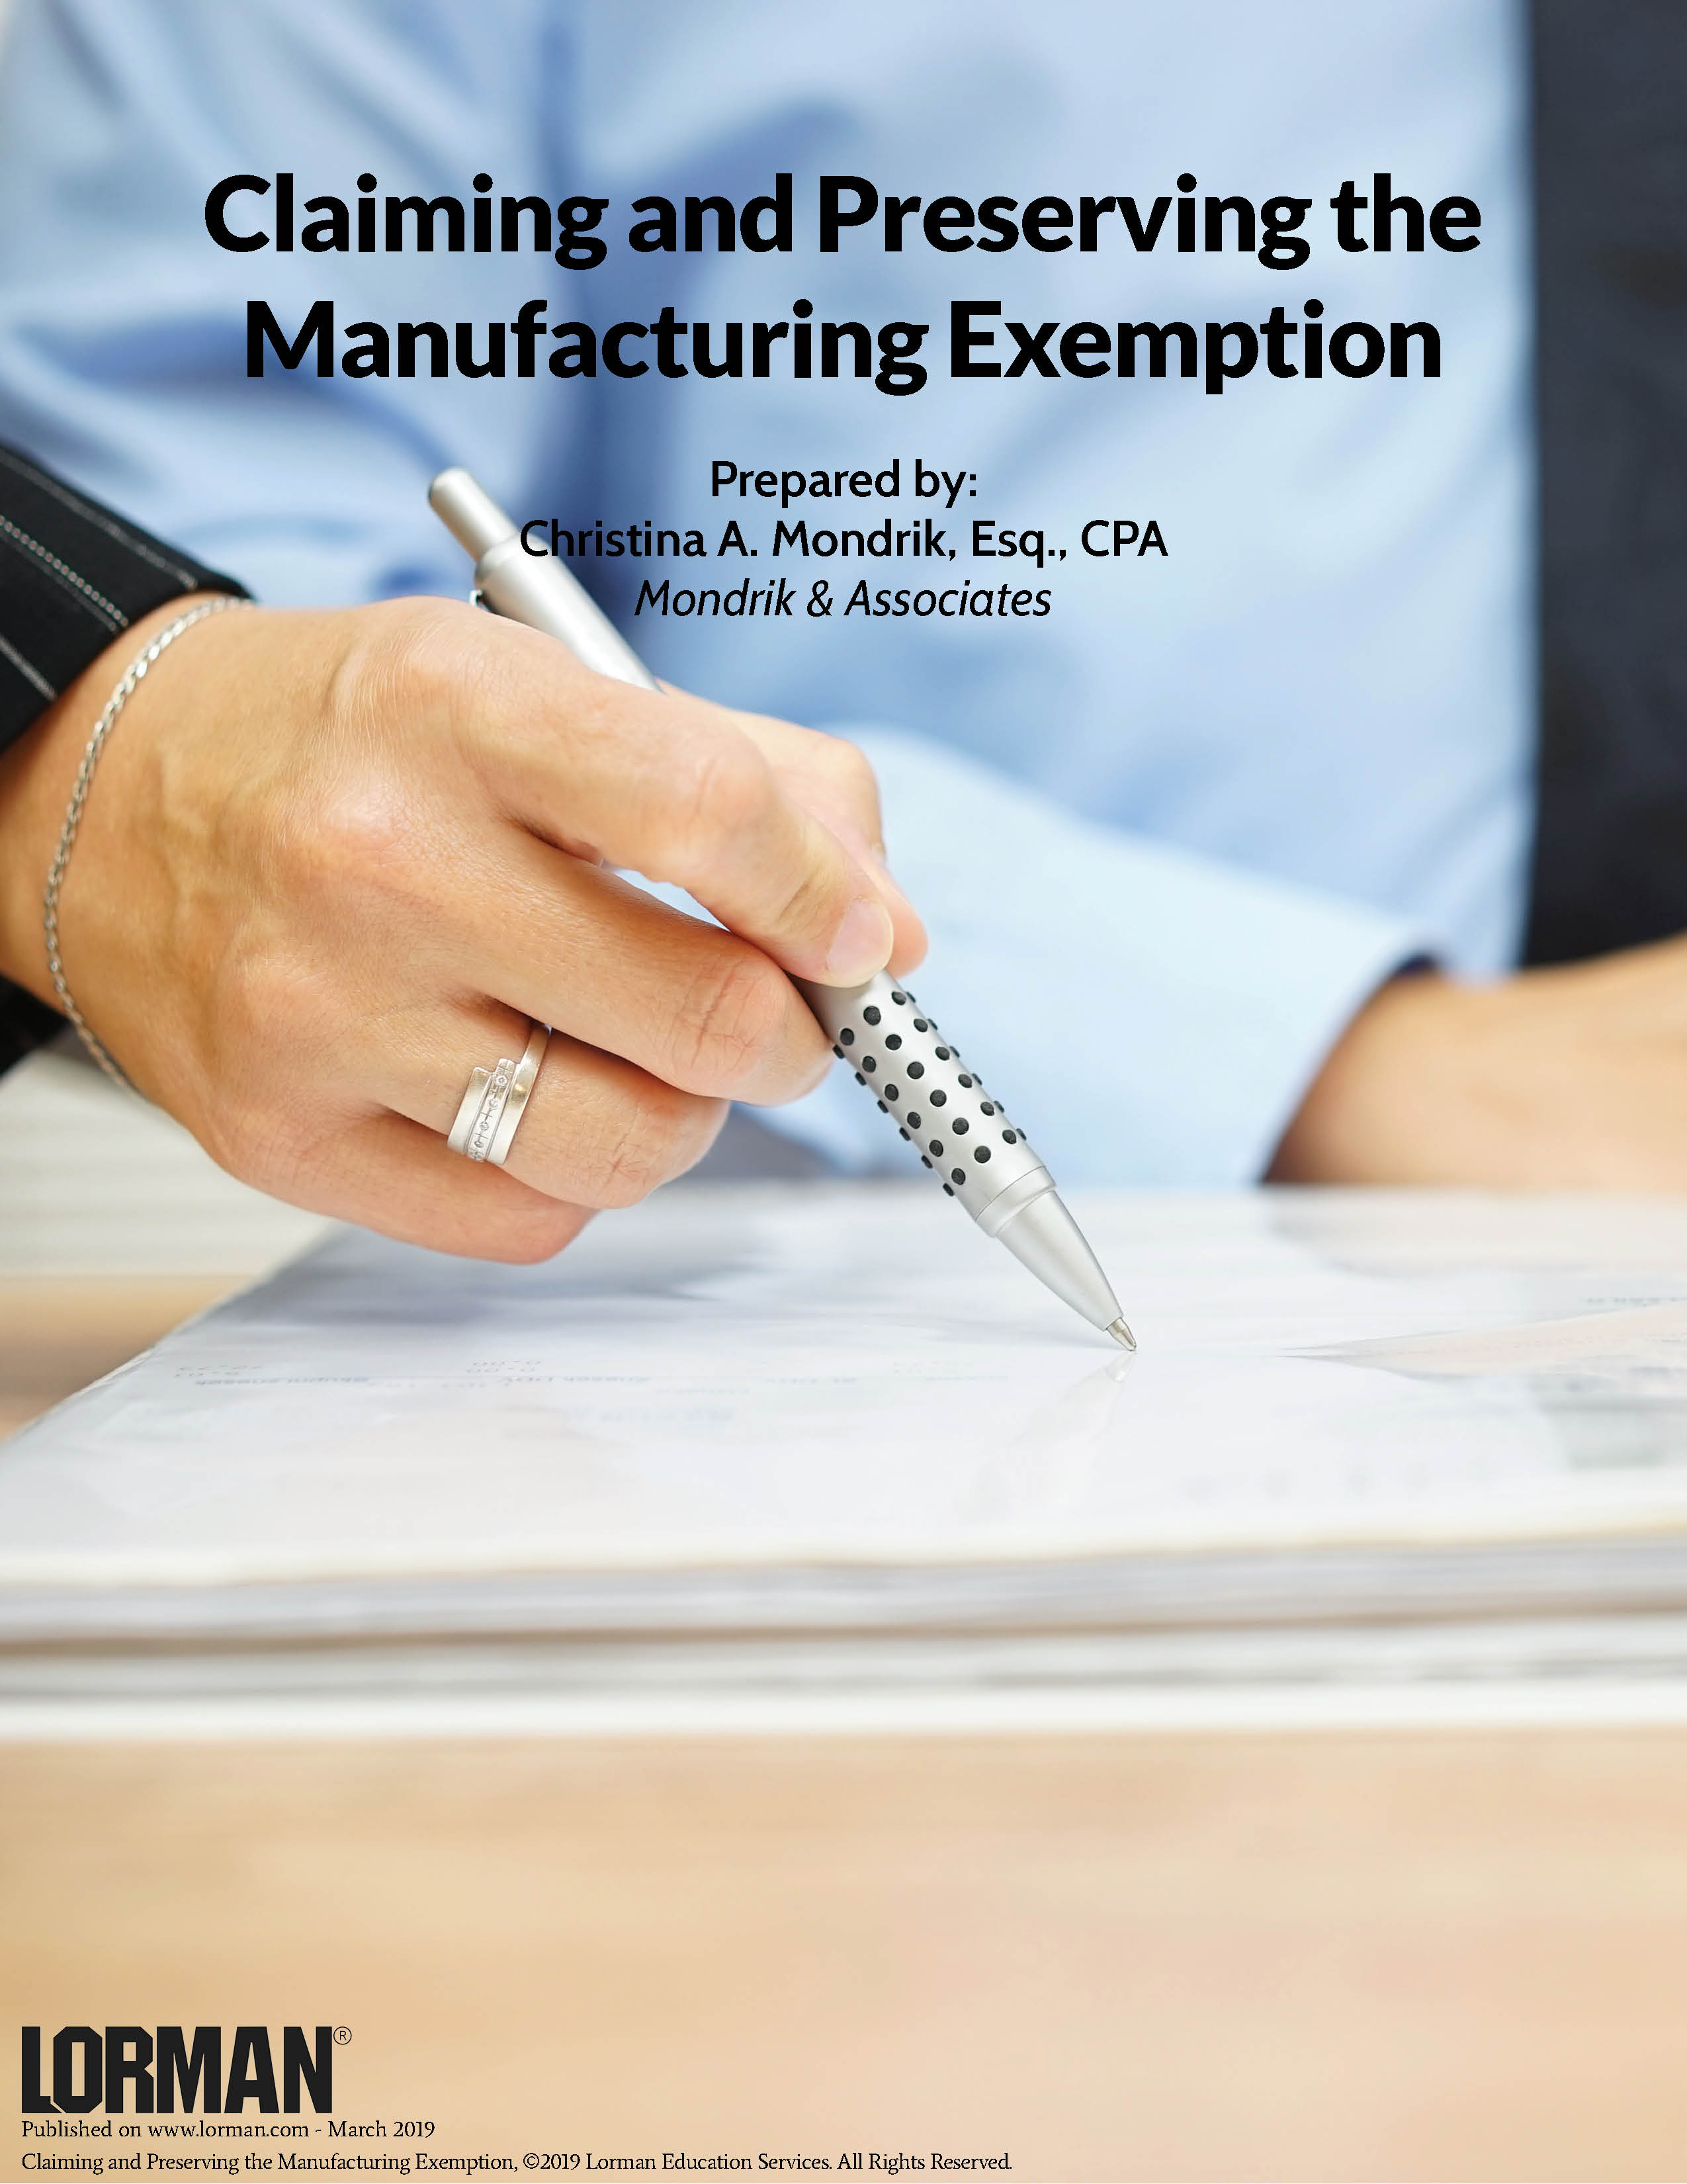 Claiming and Preserving the Manufacturing Exemption